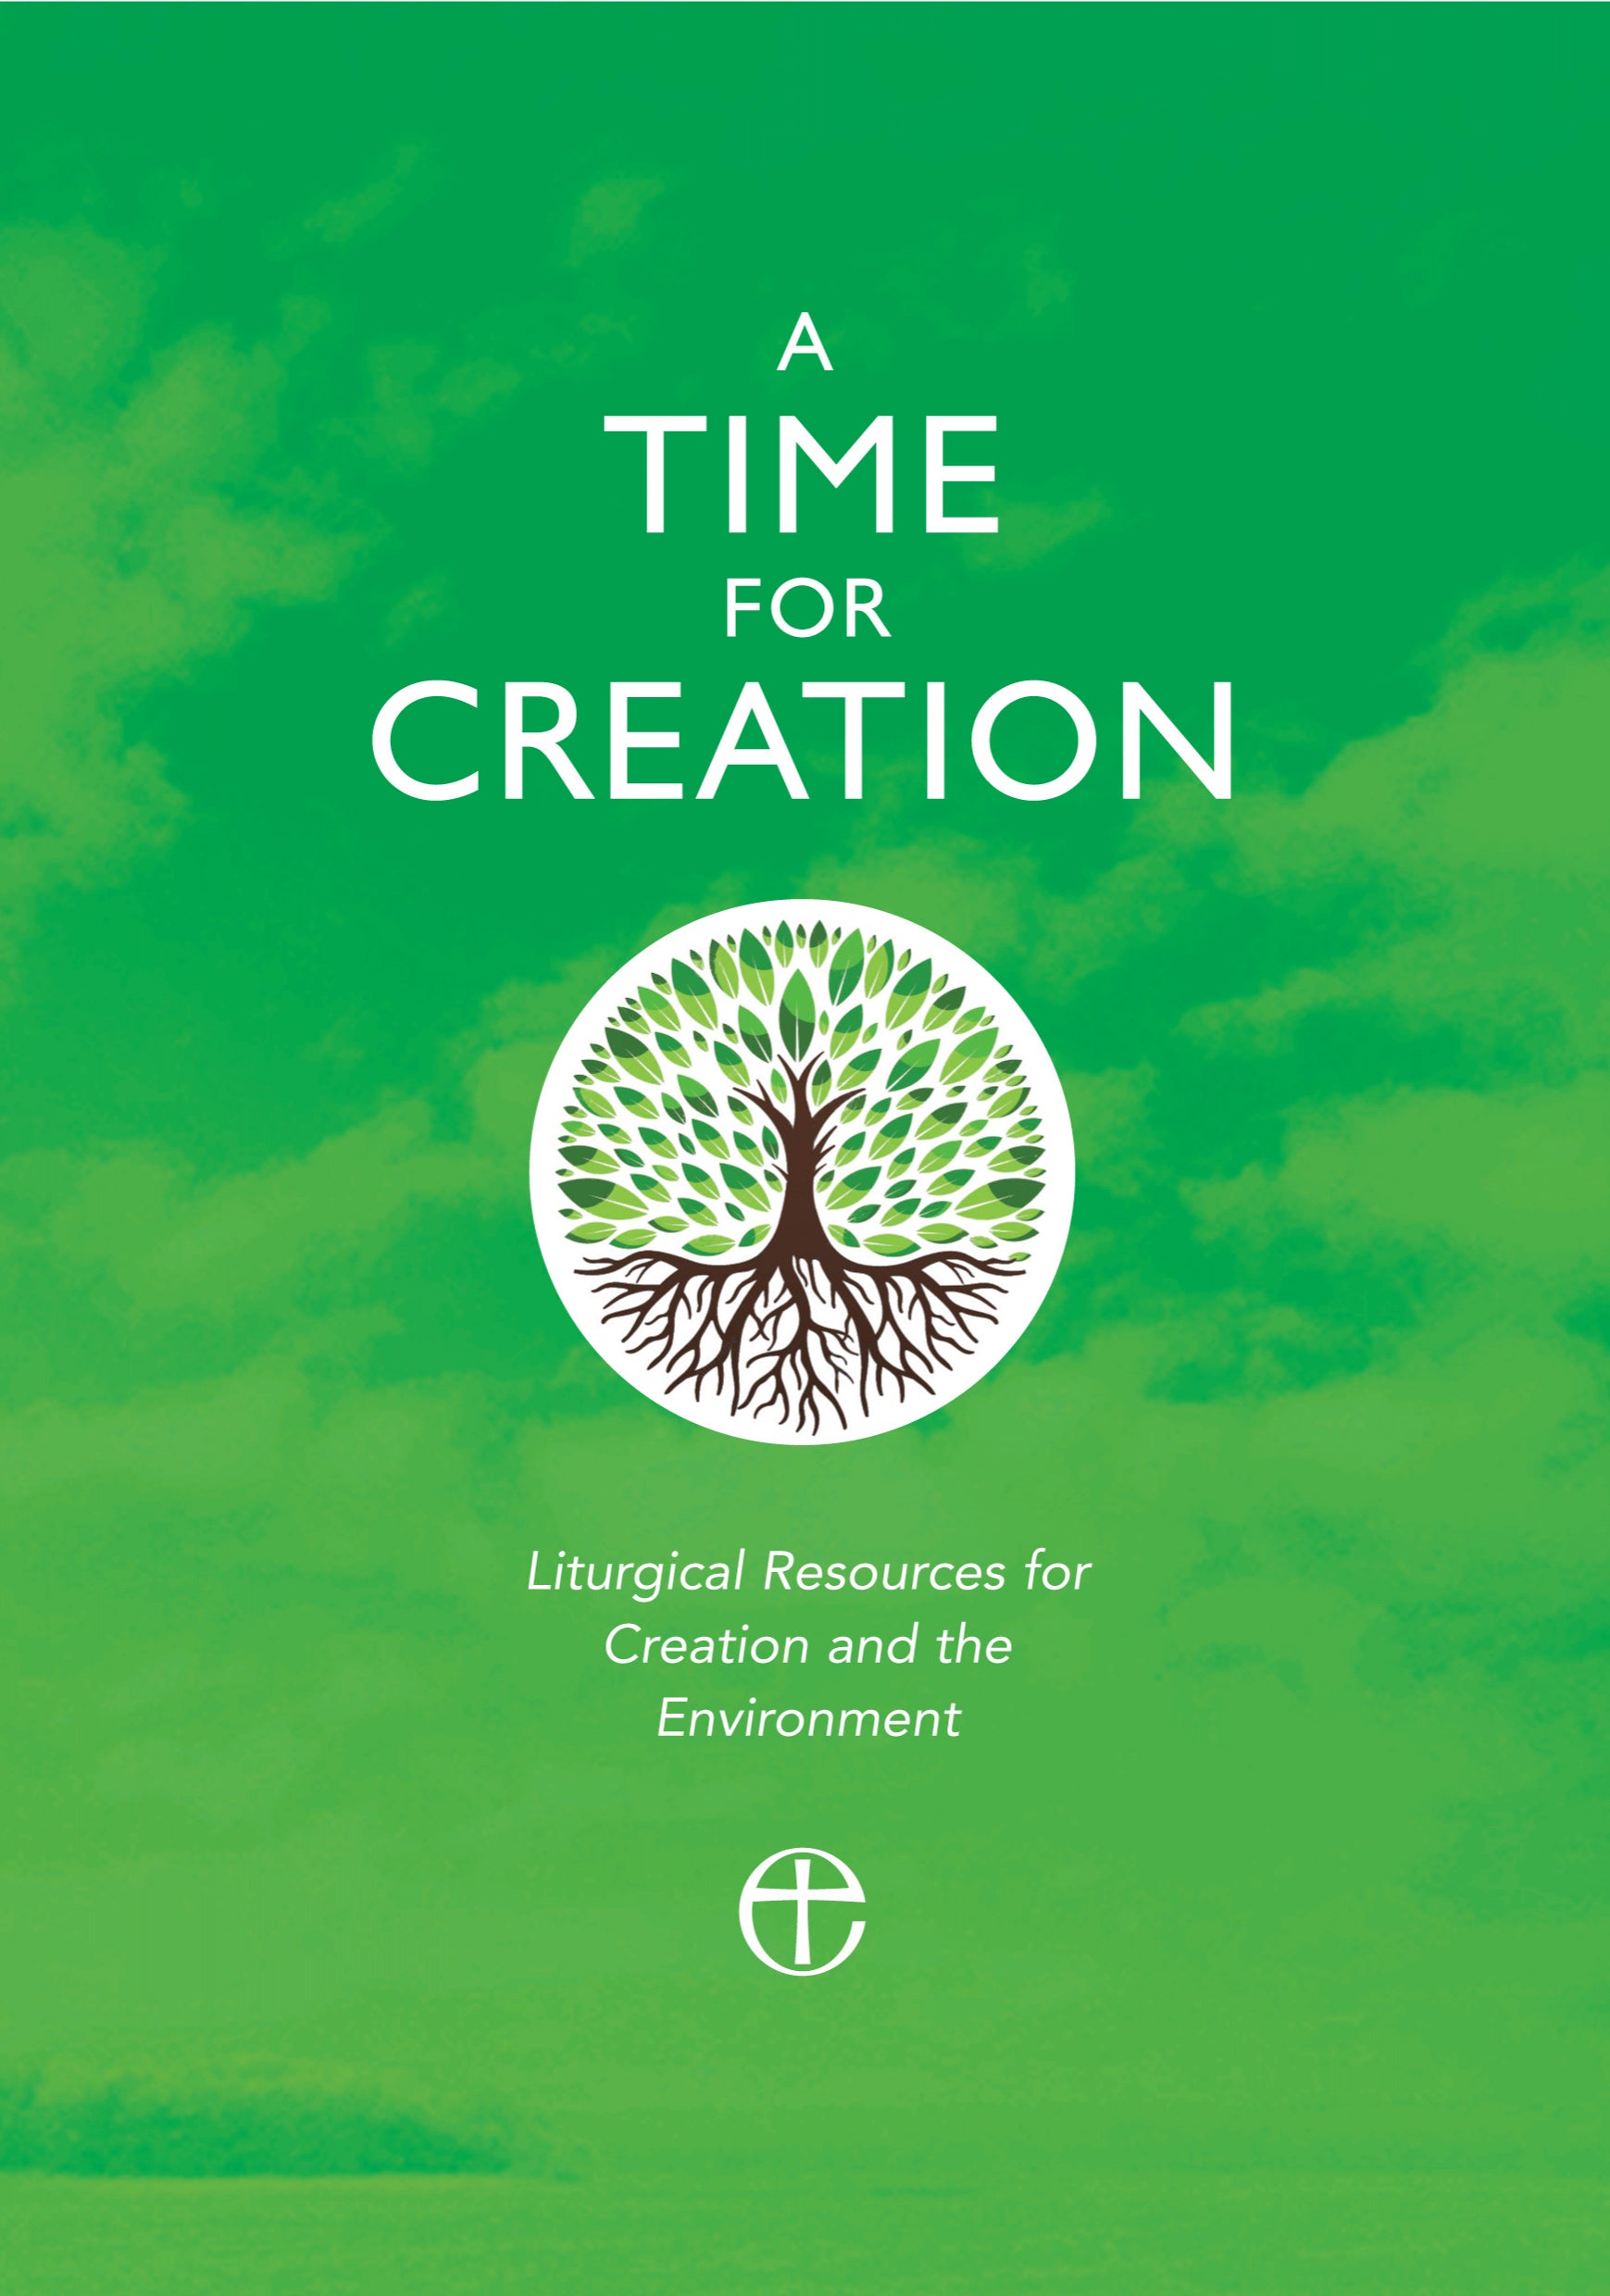 Image of A Time for Creation other